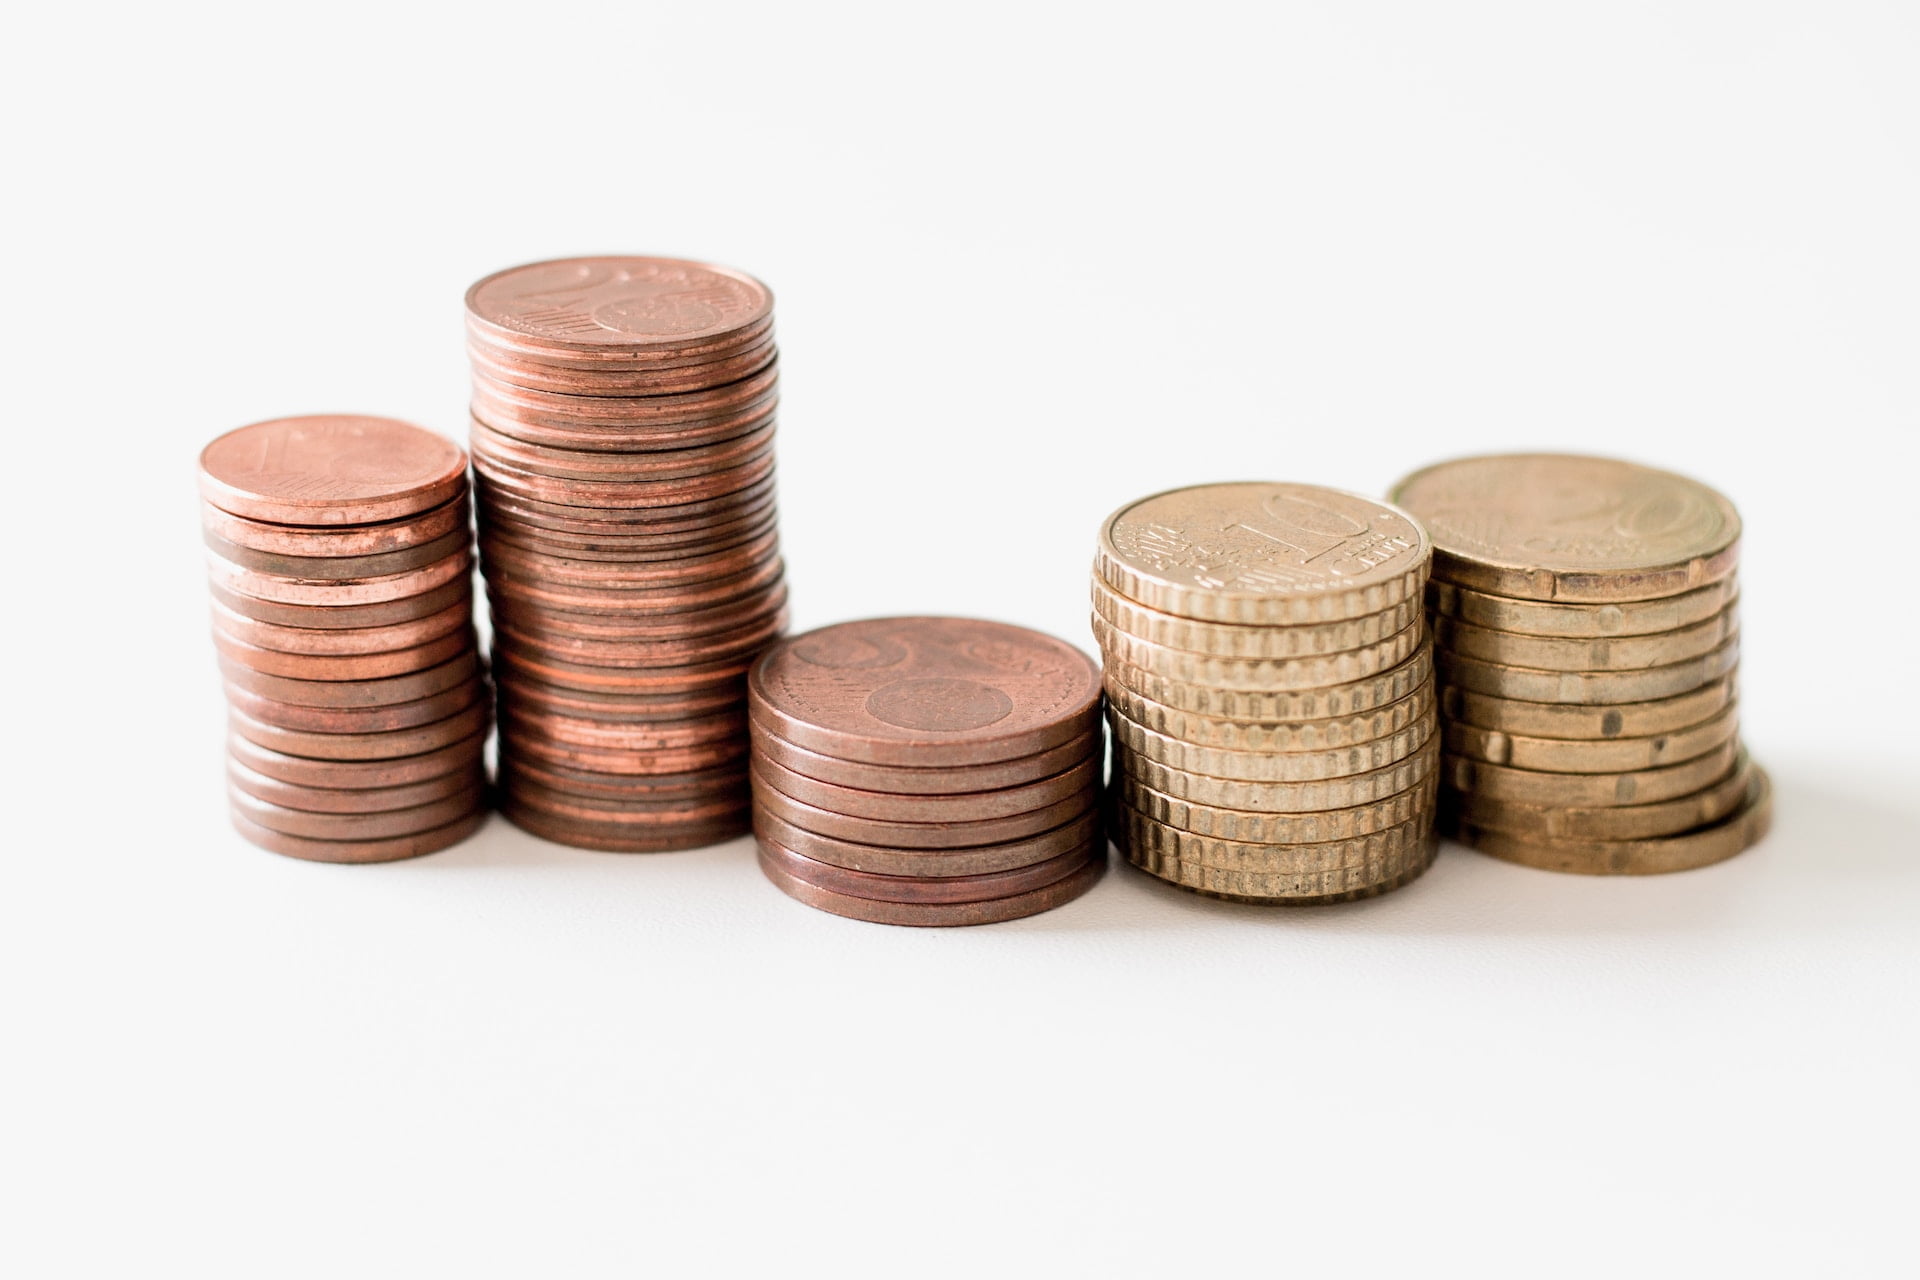 Depicts a few stacks of coins. Used as a cover image in a blog post discussing results from investing in SongVest for one year.